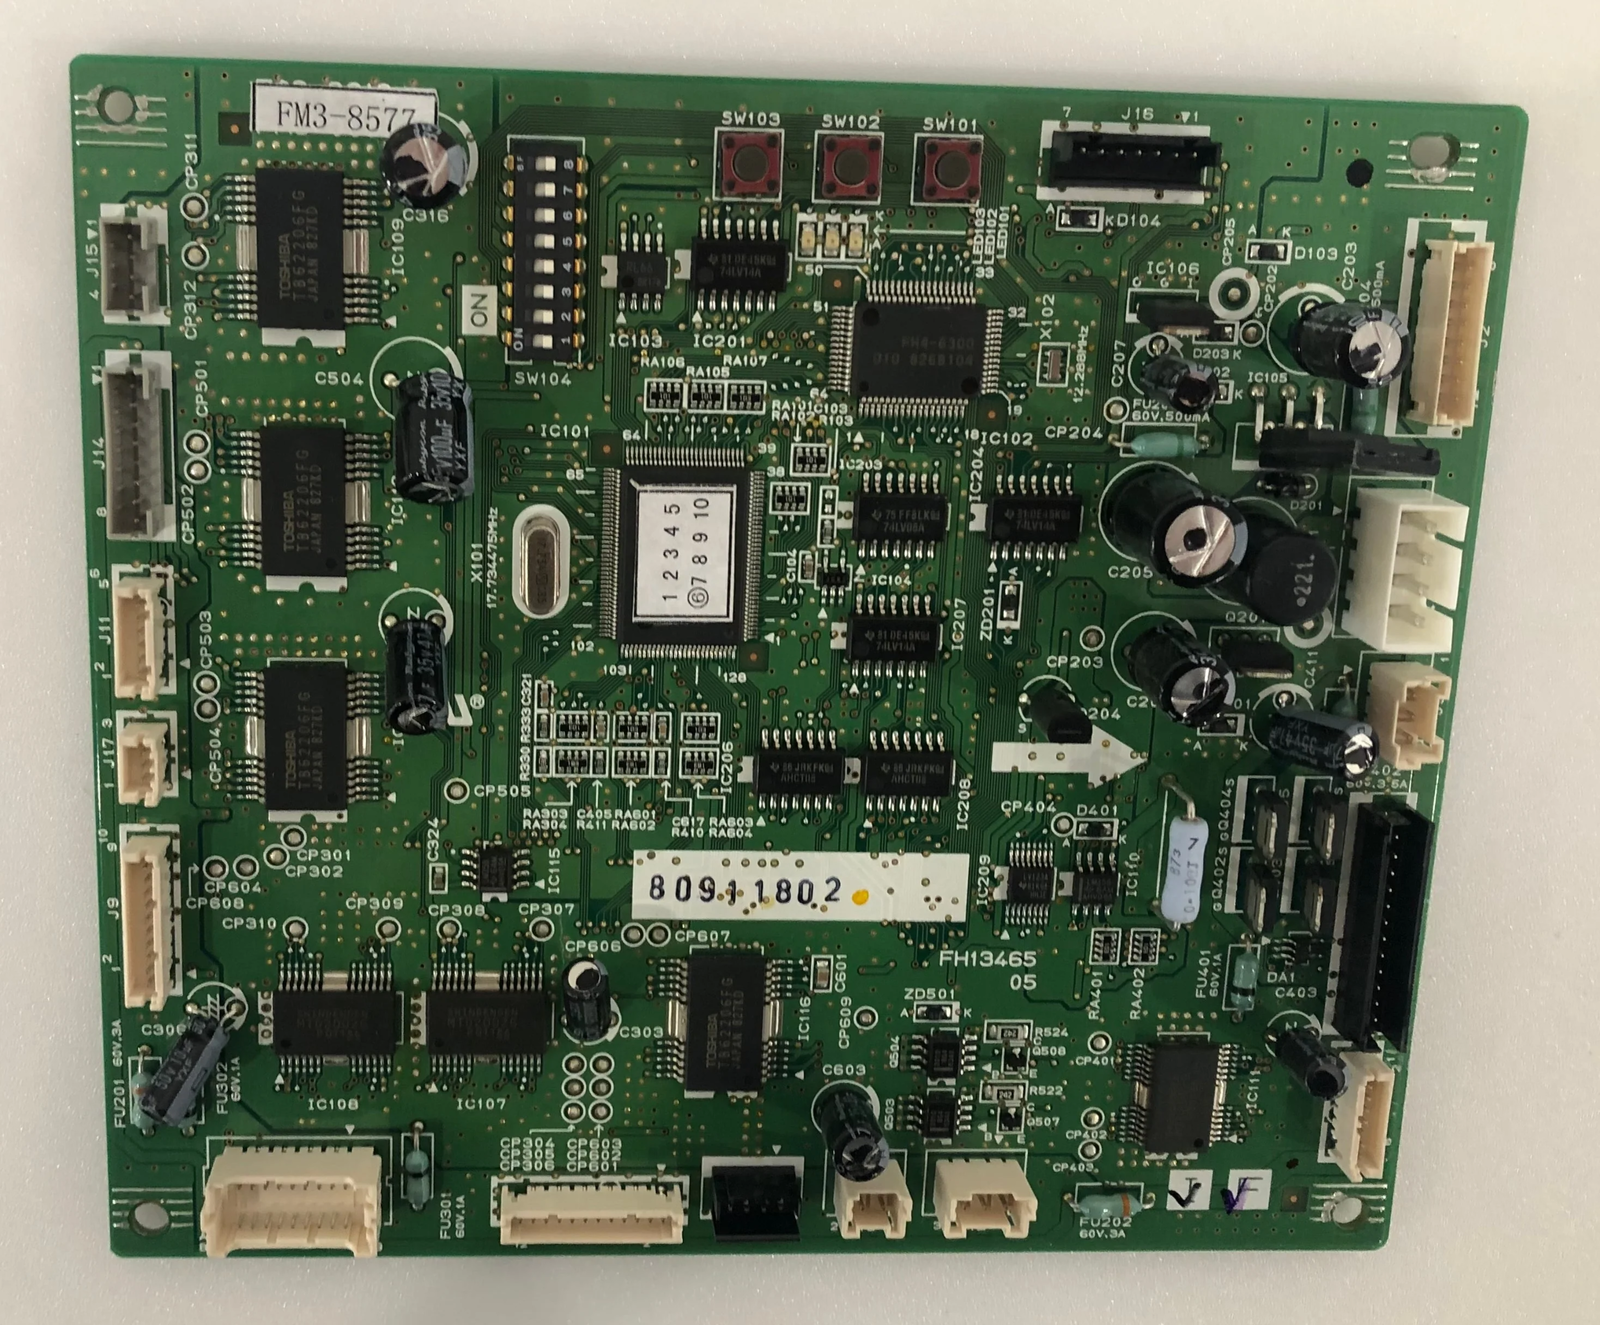 FM3-8577 FINISHER CONTROLLER PCB ASSEMBLY - Canon iRC2380i